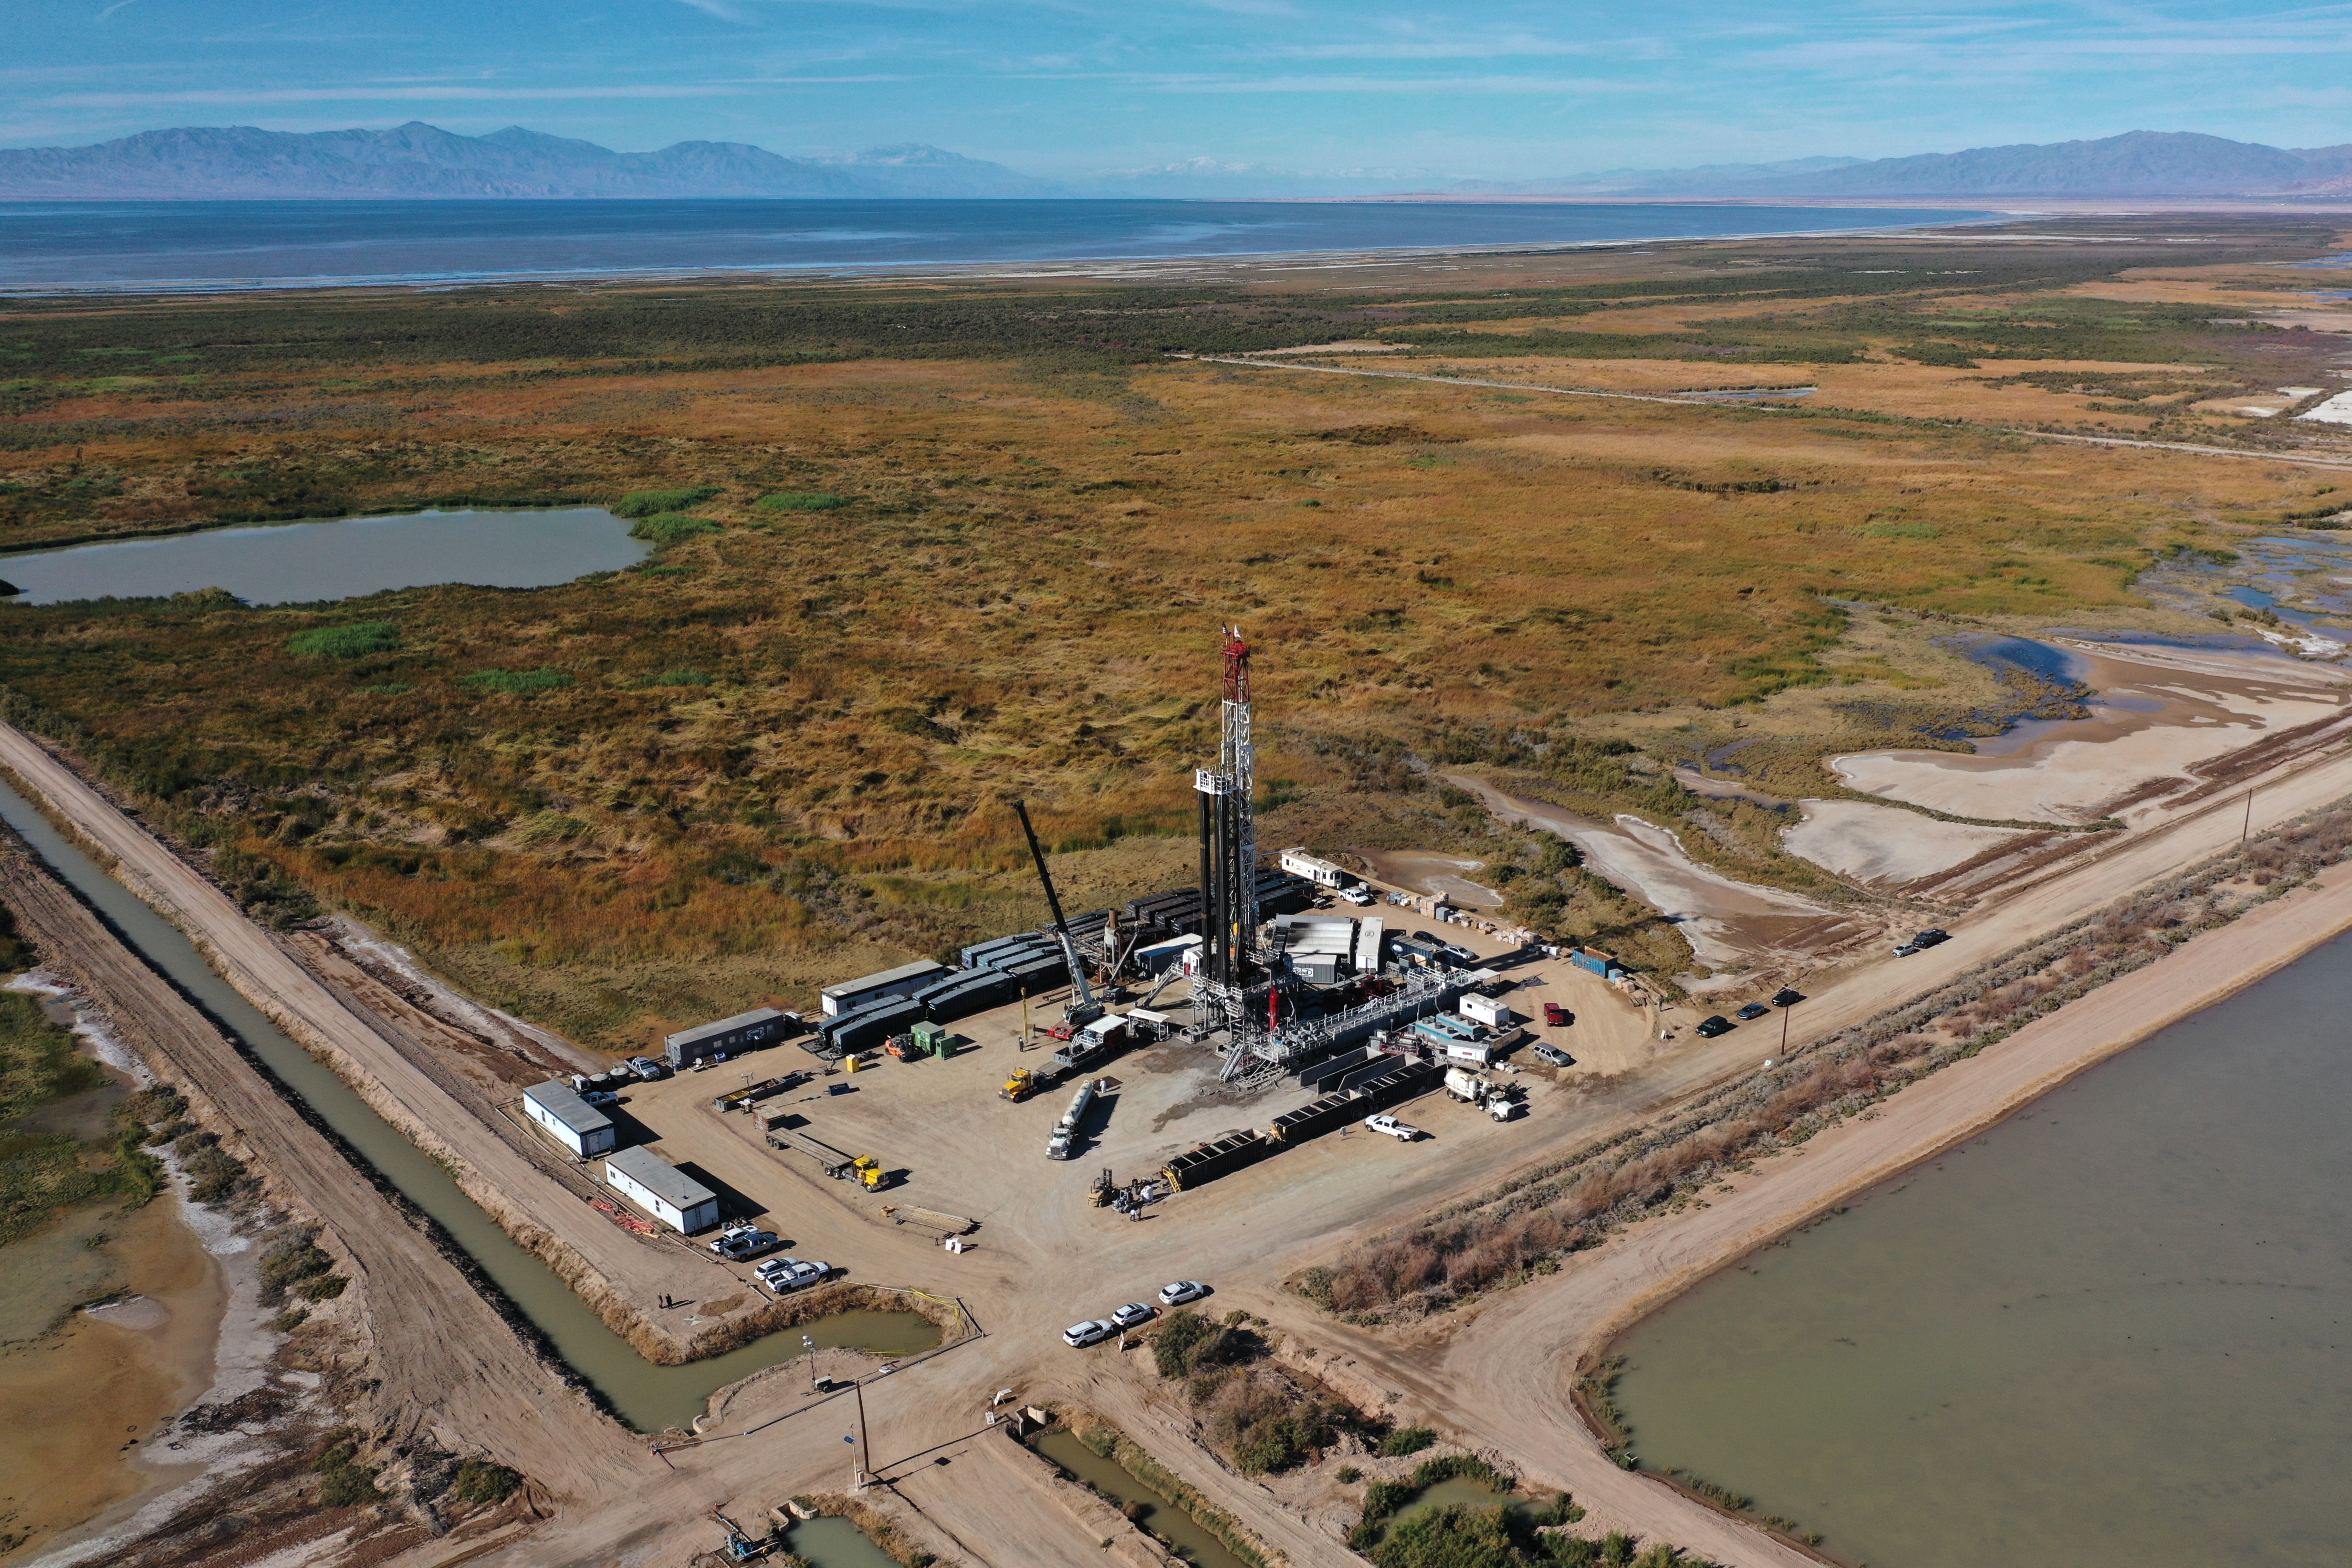 Lithium And Geothermal Power Projects In California’s Imperial Valley